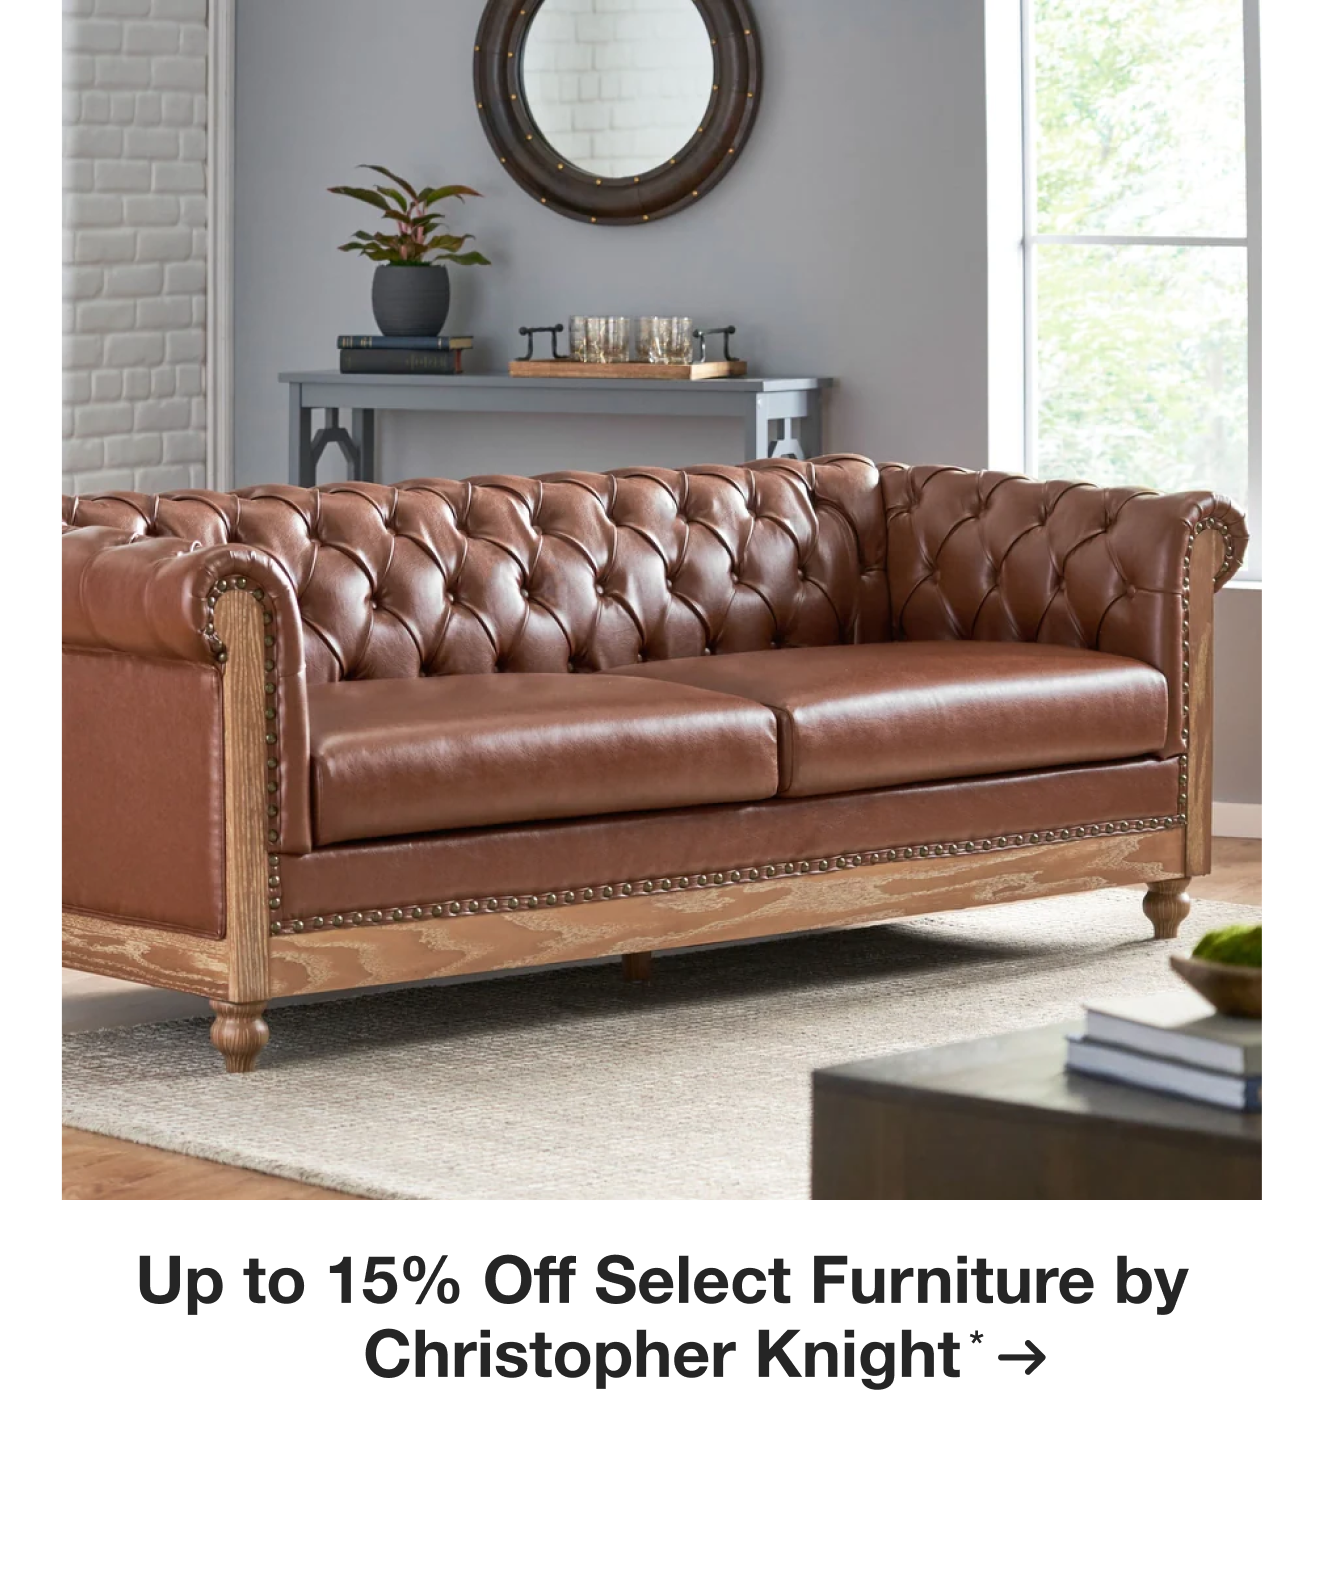 Up to 15% Off Select Furniture by Christopher Knight*